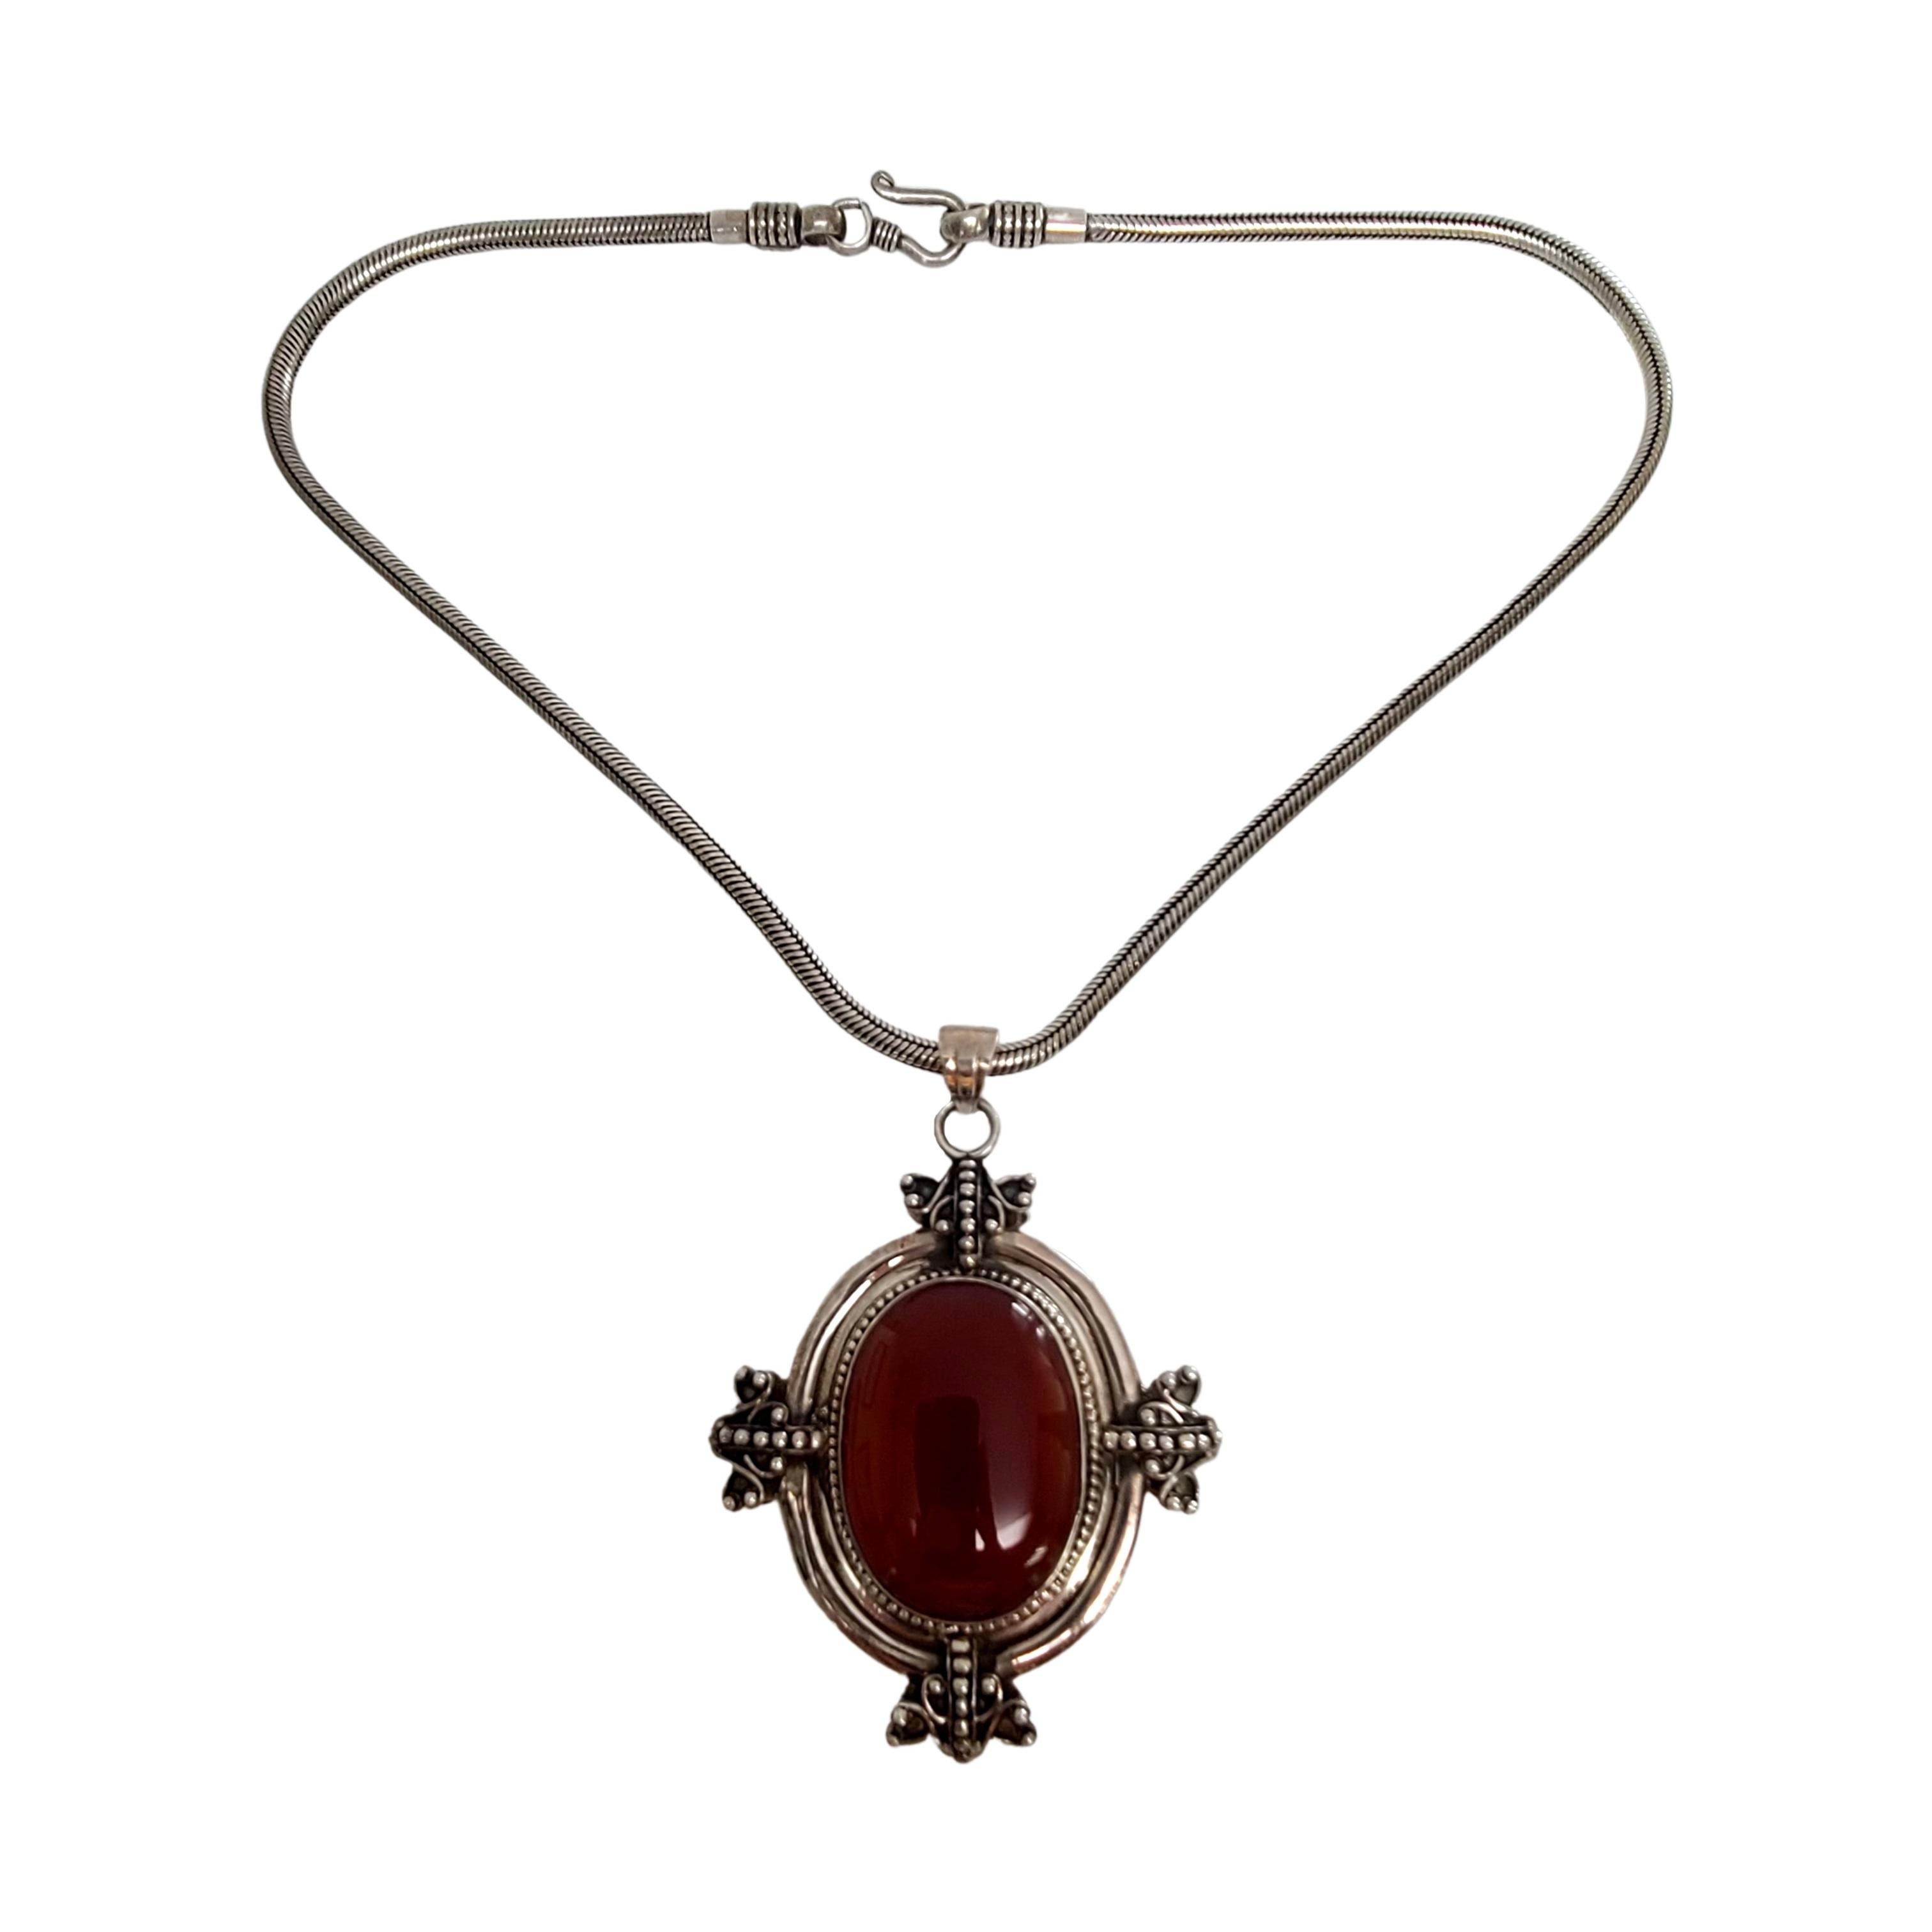 Sterling silver carnelian pendant necklace on a snake chain.

A substantial large oval carnelian pendant featuring an oval carnelian with a beaded design accents. Snake chain with hook closure.

Chain measures approx 18